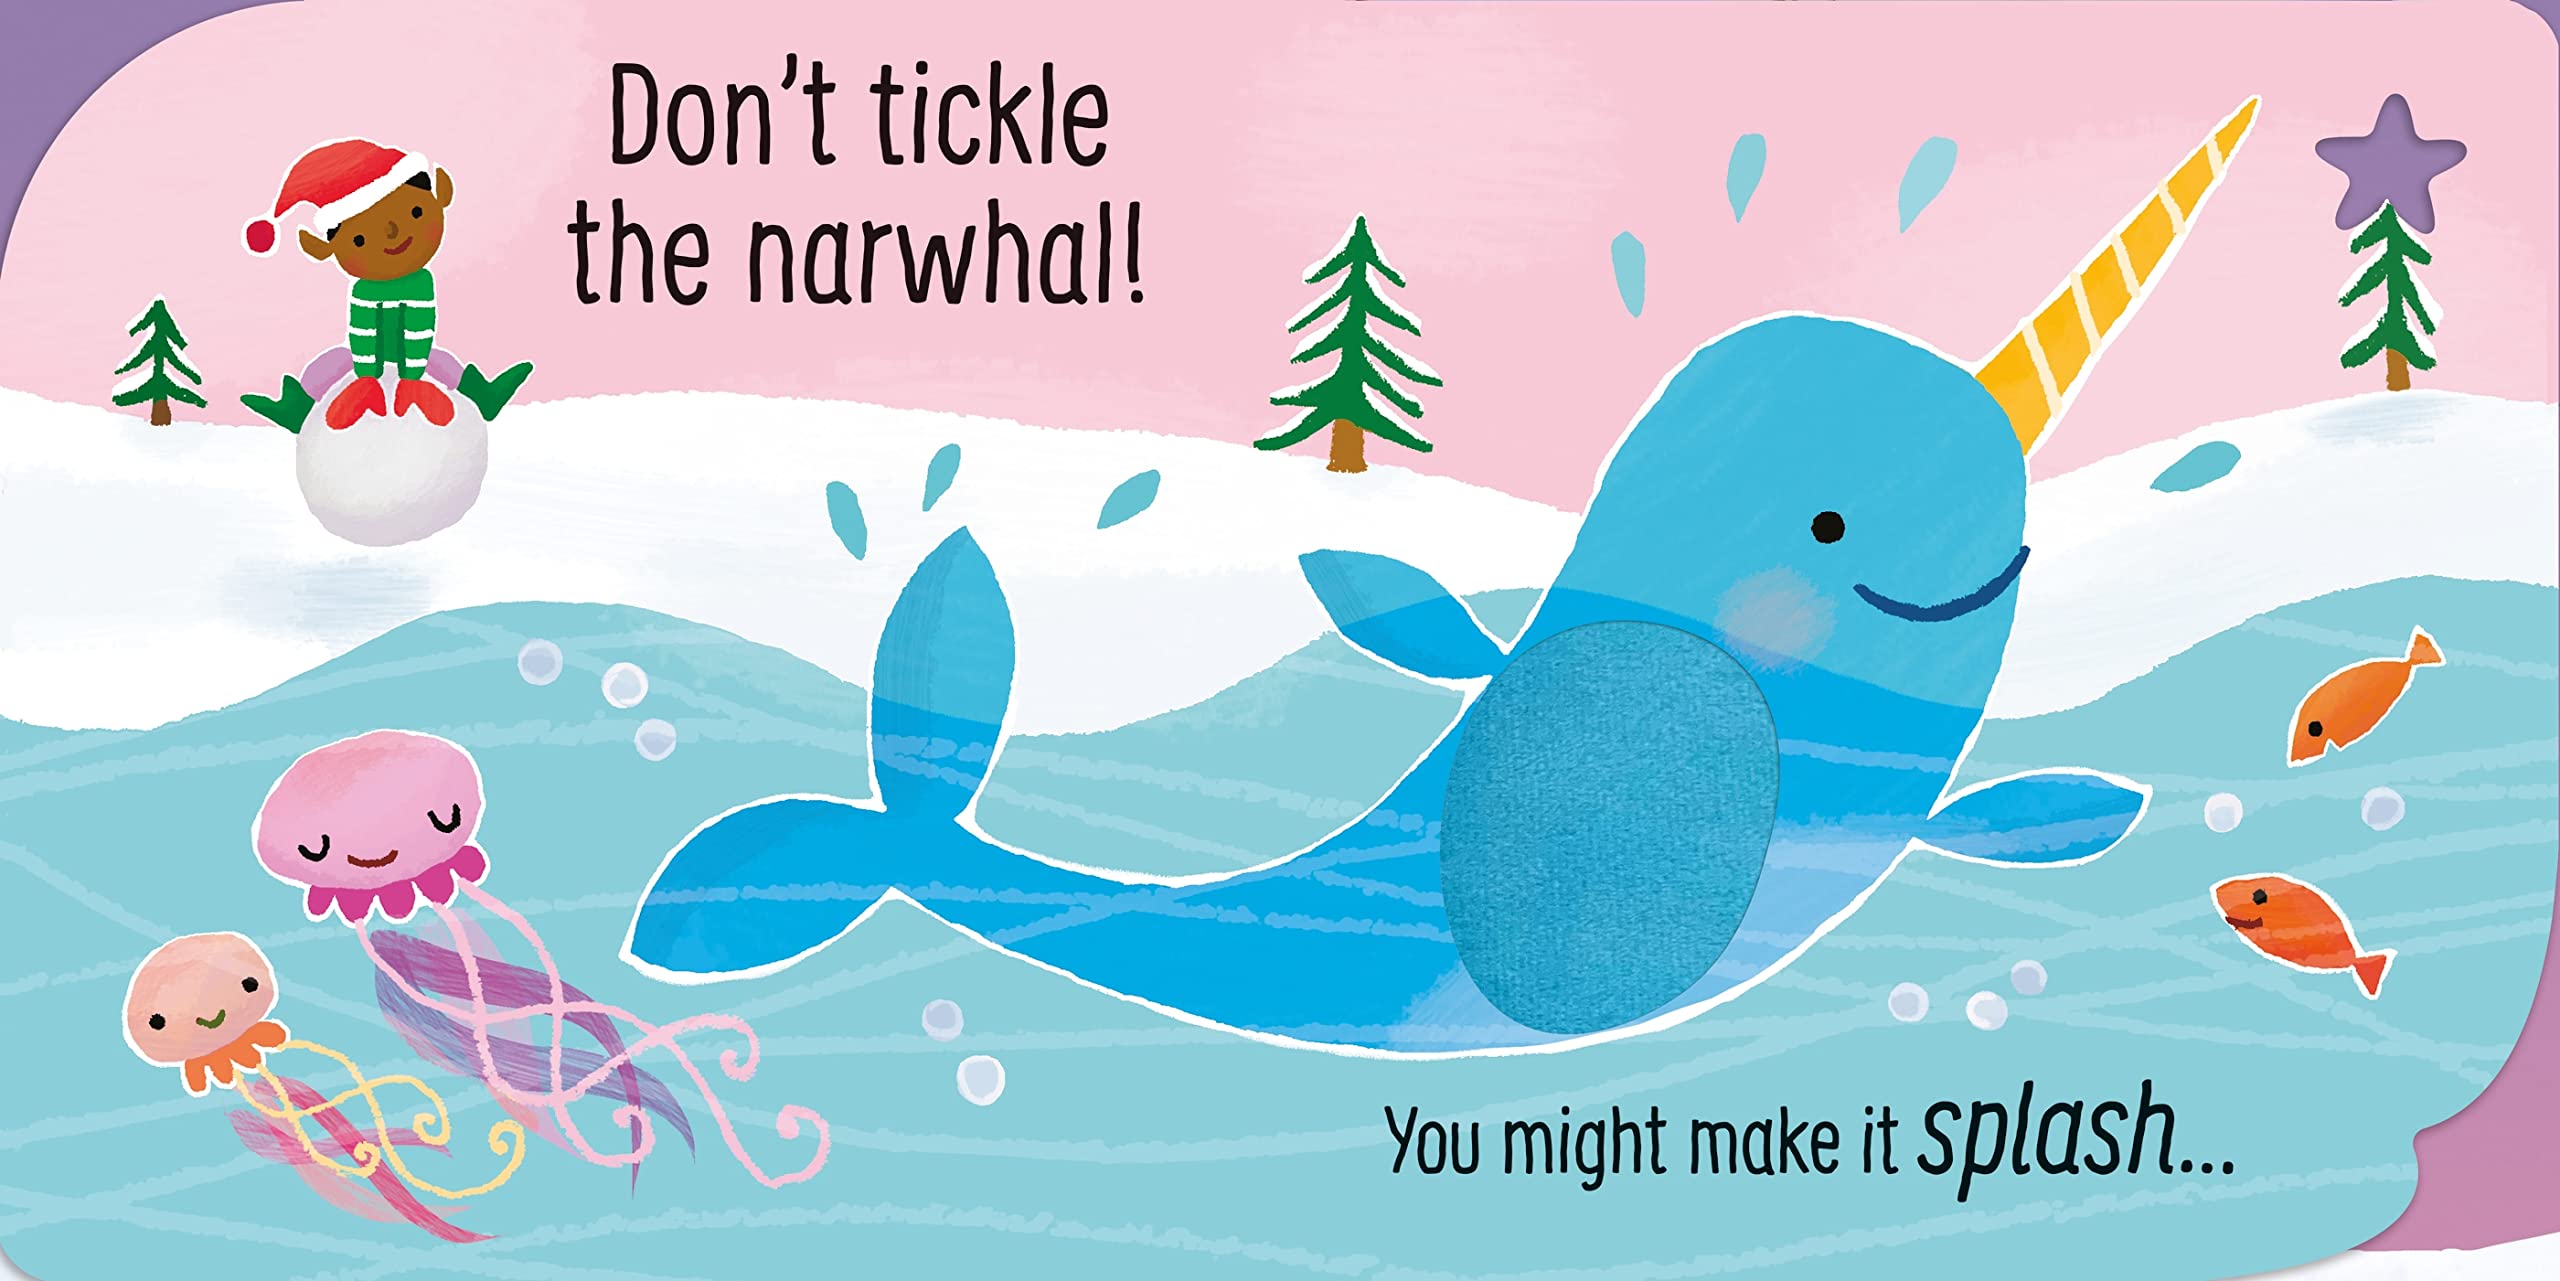 Don't Tickle the Reindeer! (Touchy-feely sound books)